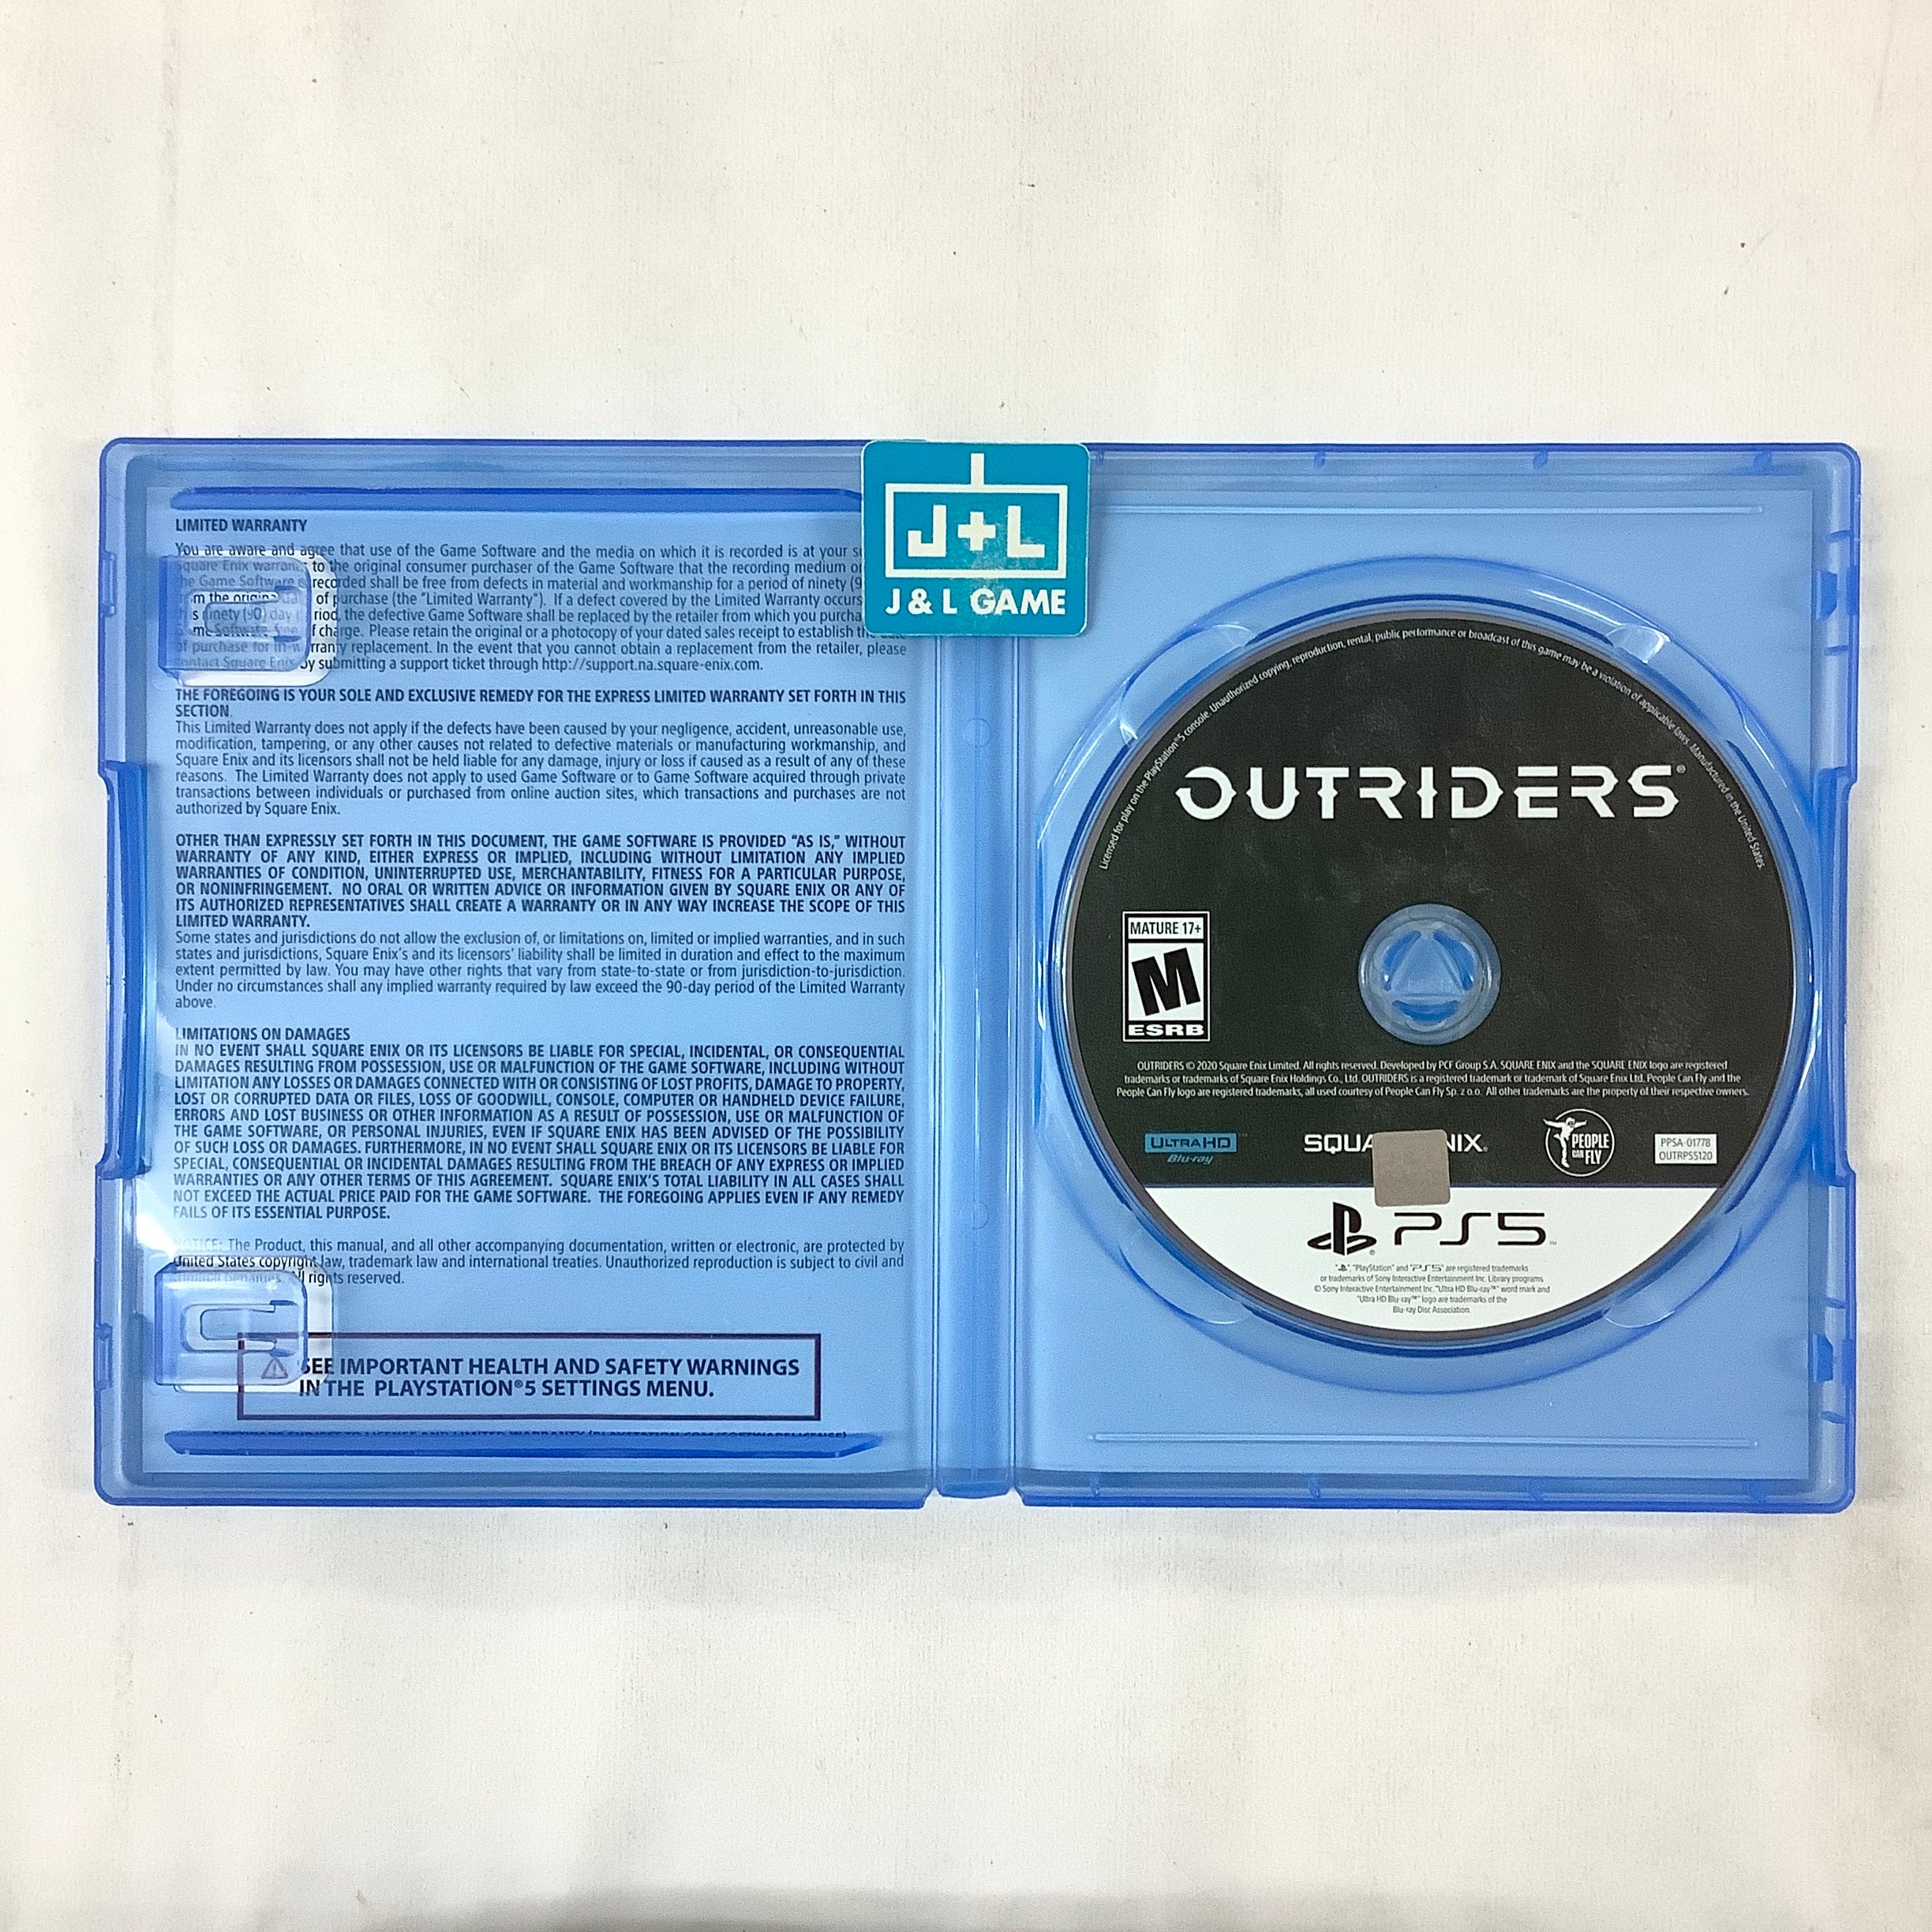 Outriders Day One Edition - (PS5) PlayStation 5 [Pre-Owned] Video Games Square Enix   